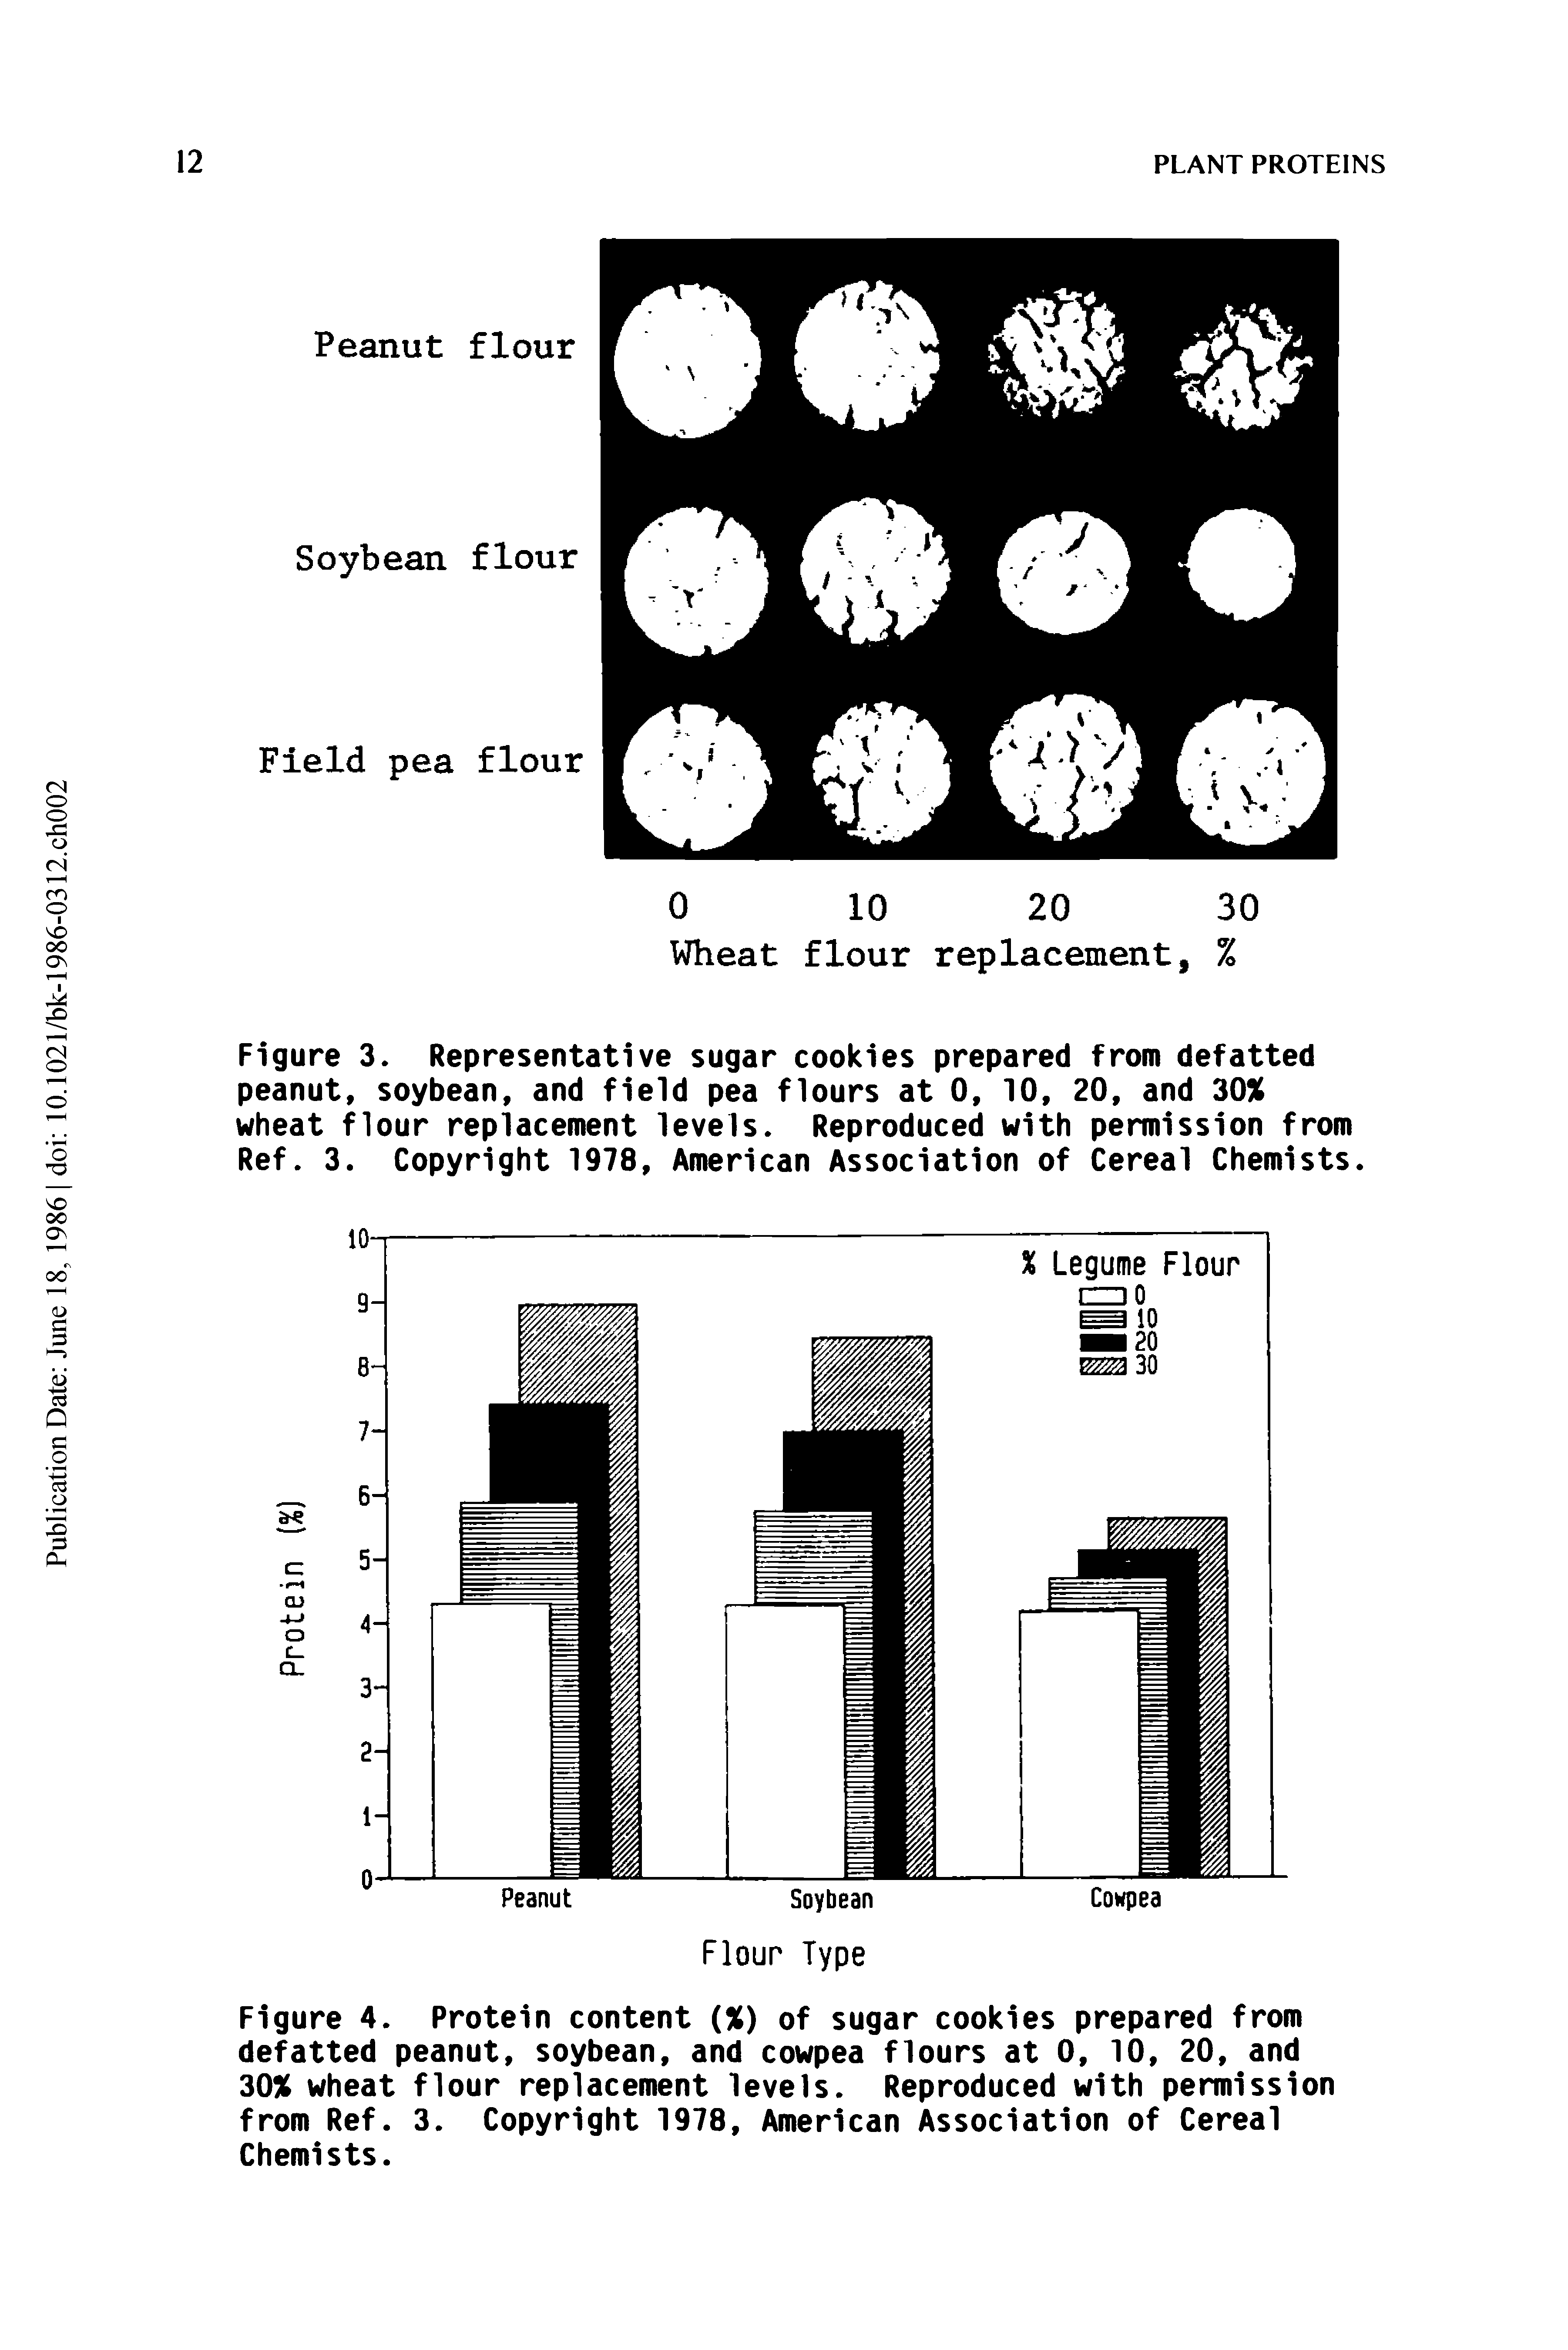 Figure 4. Protein content (%) of sugar cookies prepared from defatted peanut, soybean, and cowpea flours at 0, 10, 20, and 30% wheat flour replacement levels. Reproduced with permission from Ref. 3. Copyright 1978, American Association of Cereal Chemists.